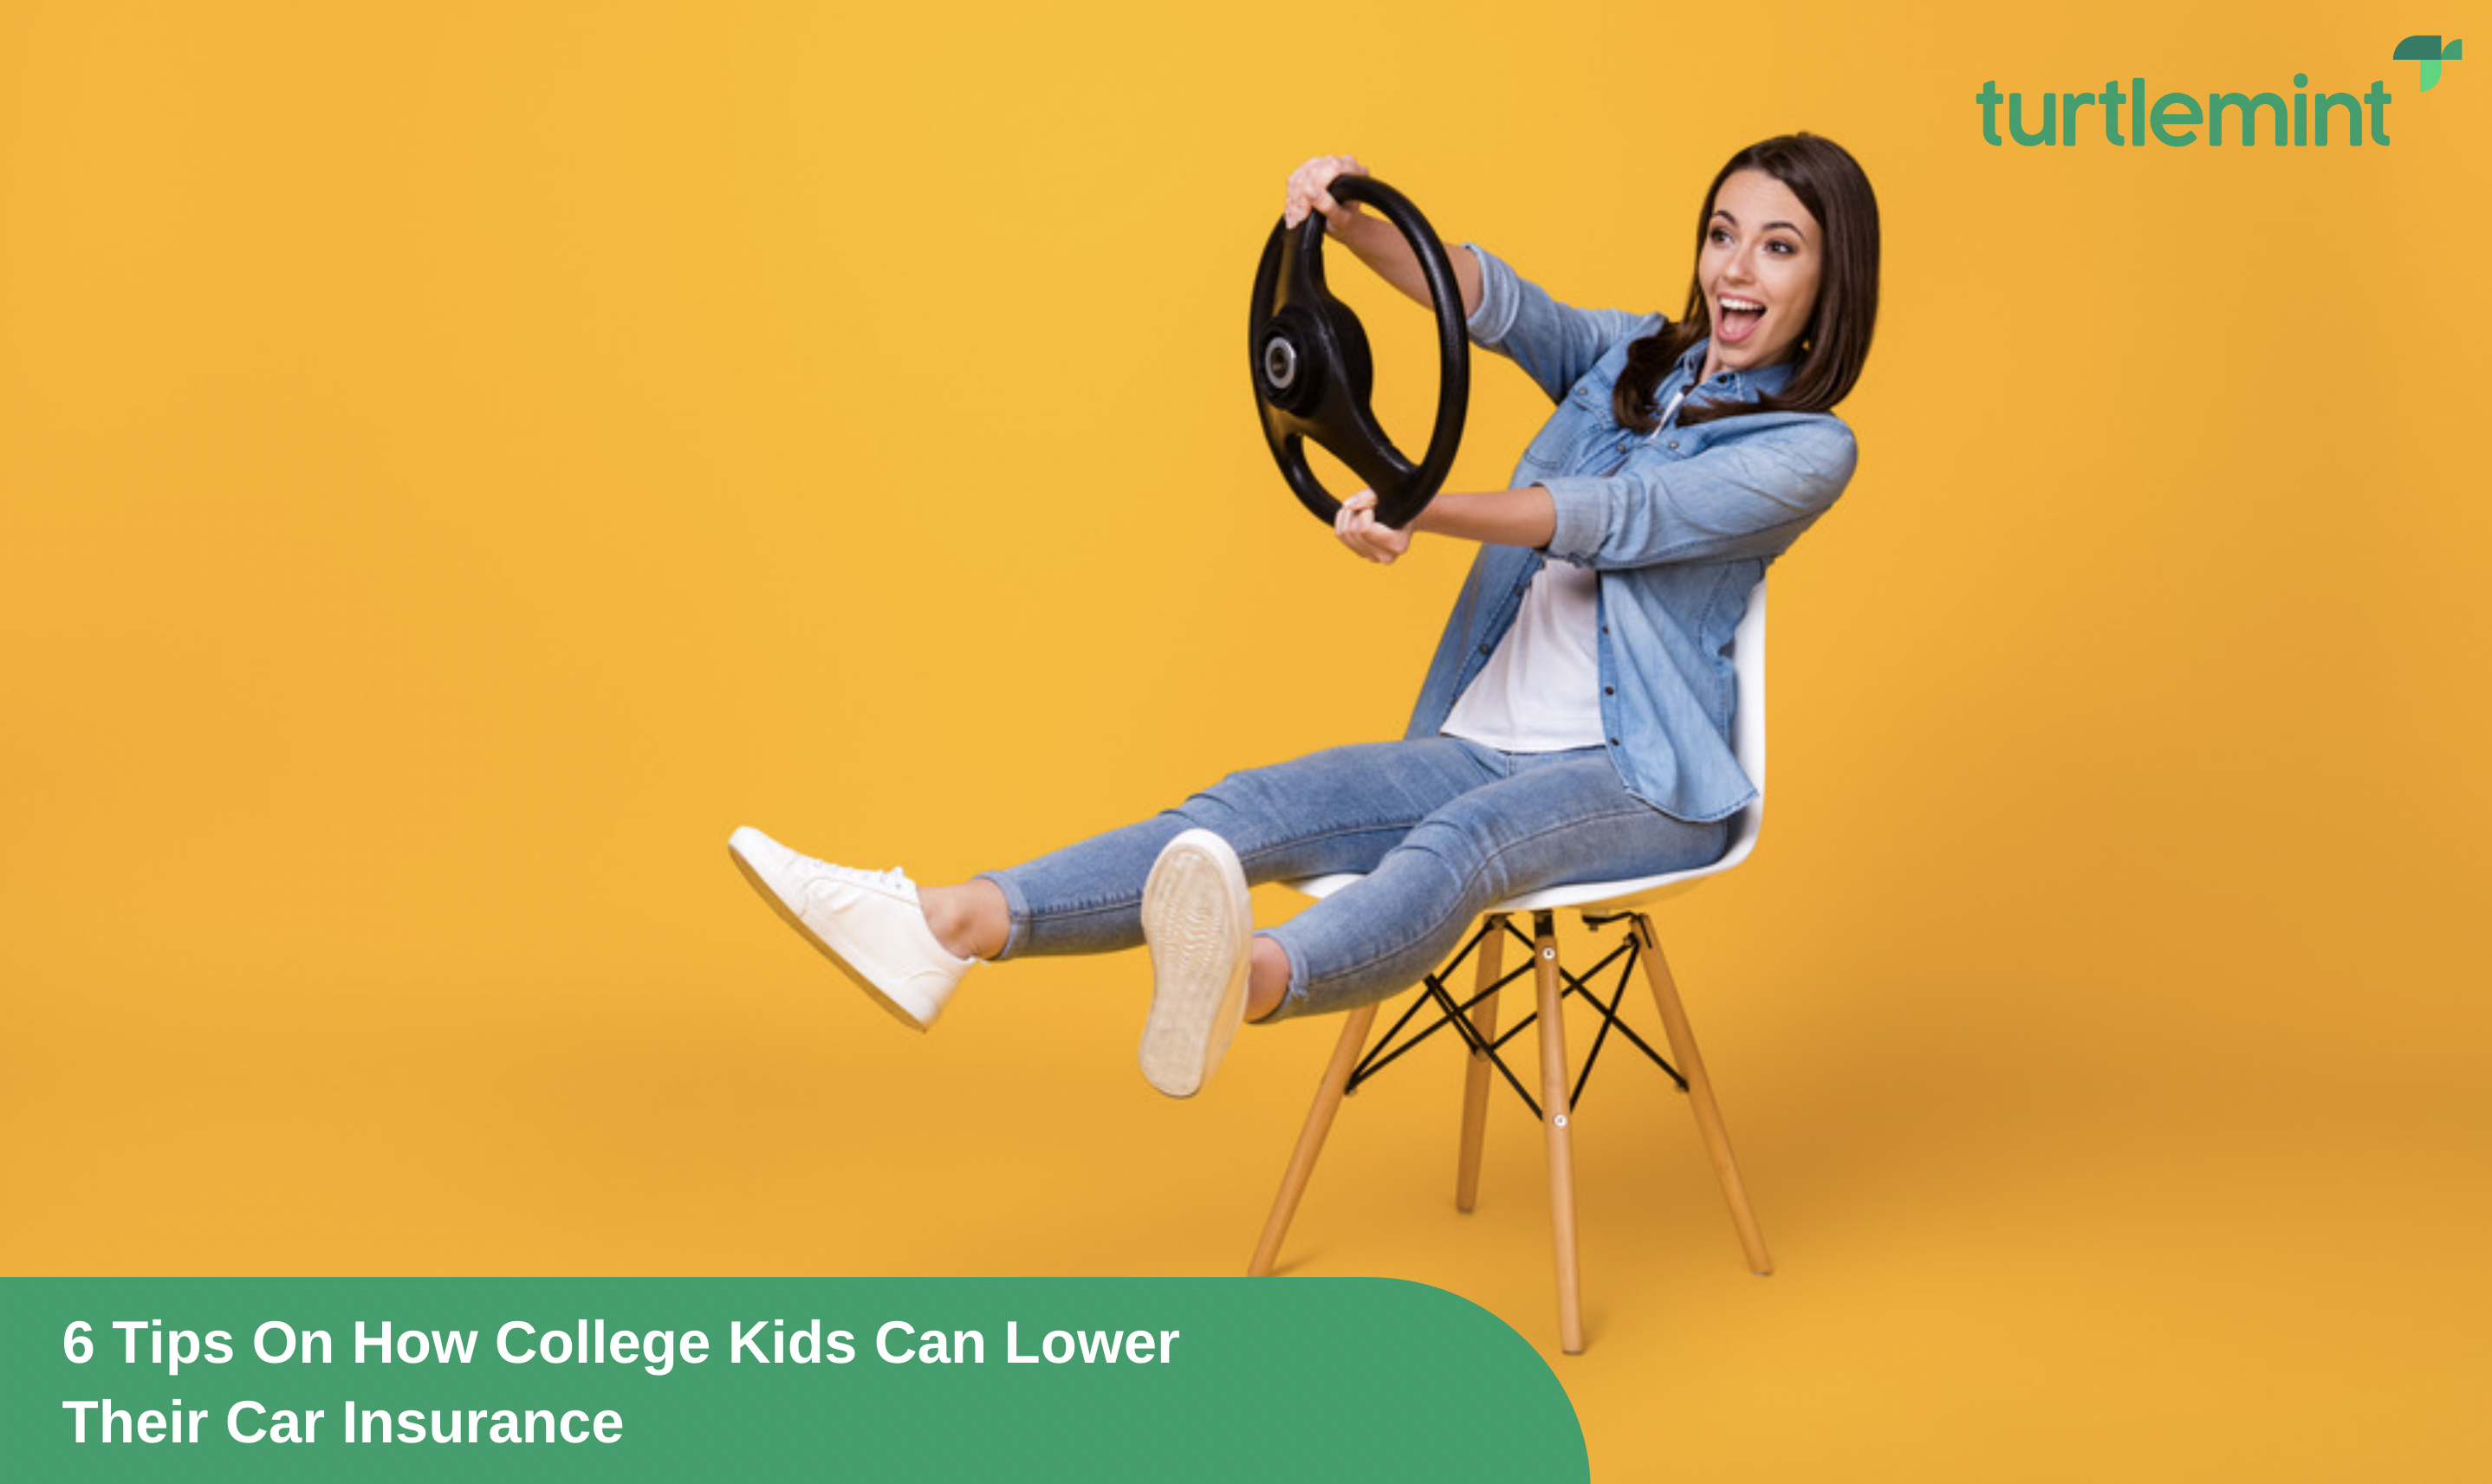 6 Tips On How College Kids Can Lower Their Car Insurance